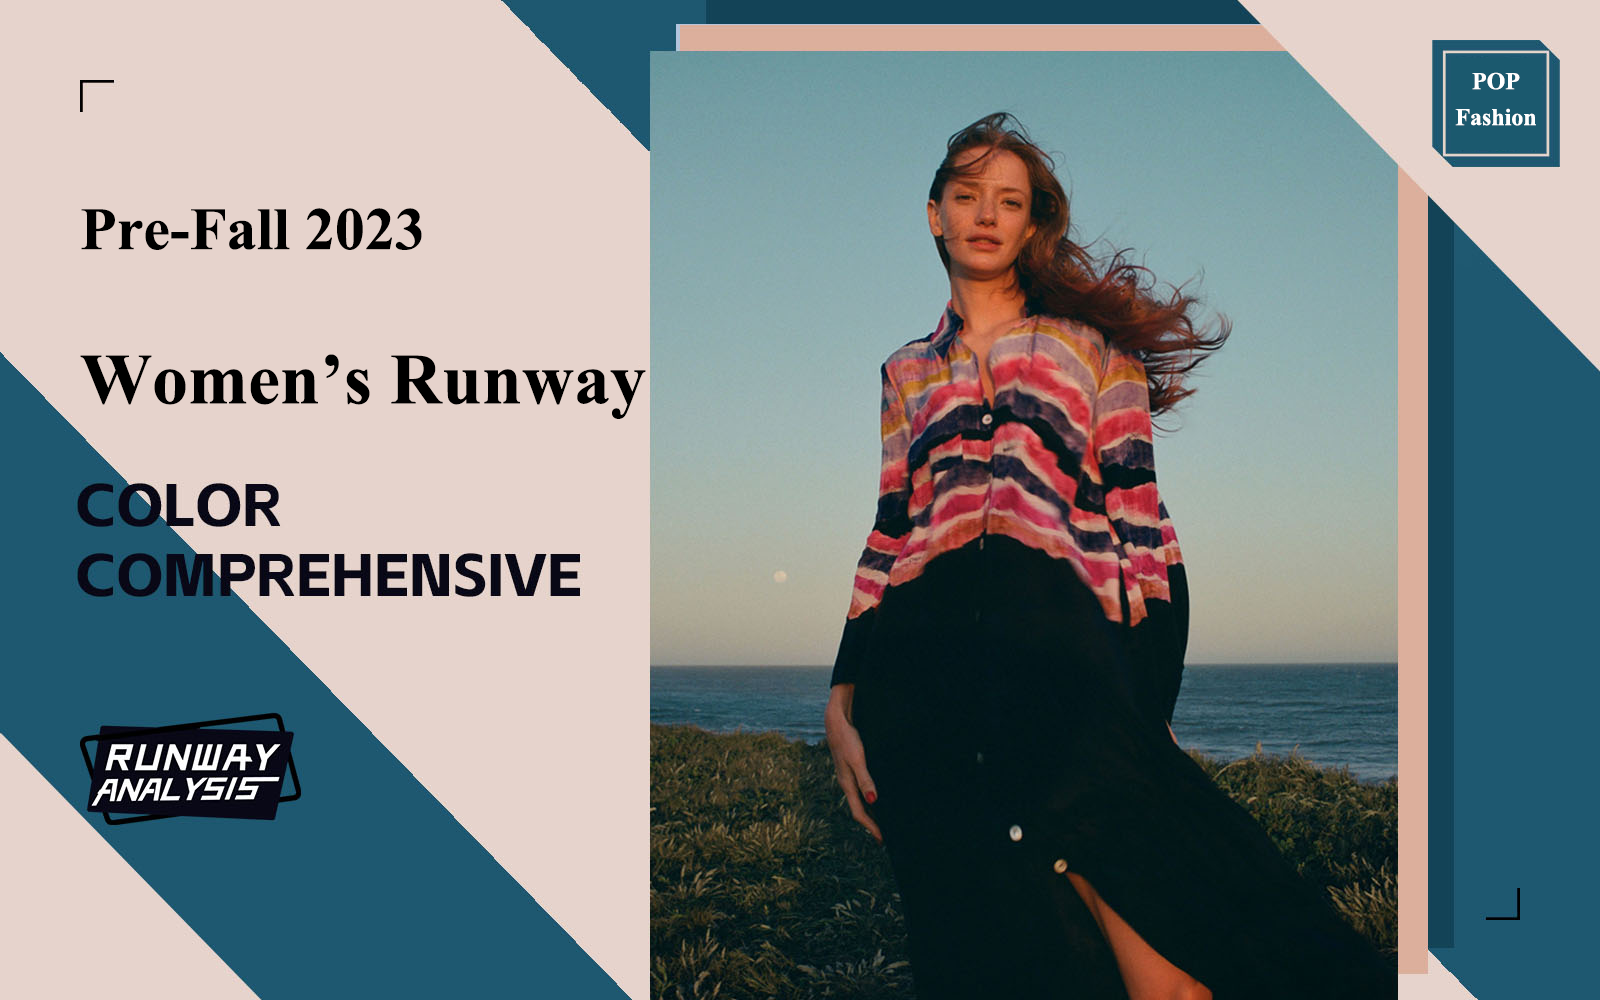 The Comprehensive Color Analysis of Pre-Fall 2023 Women's Runway Show